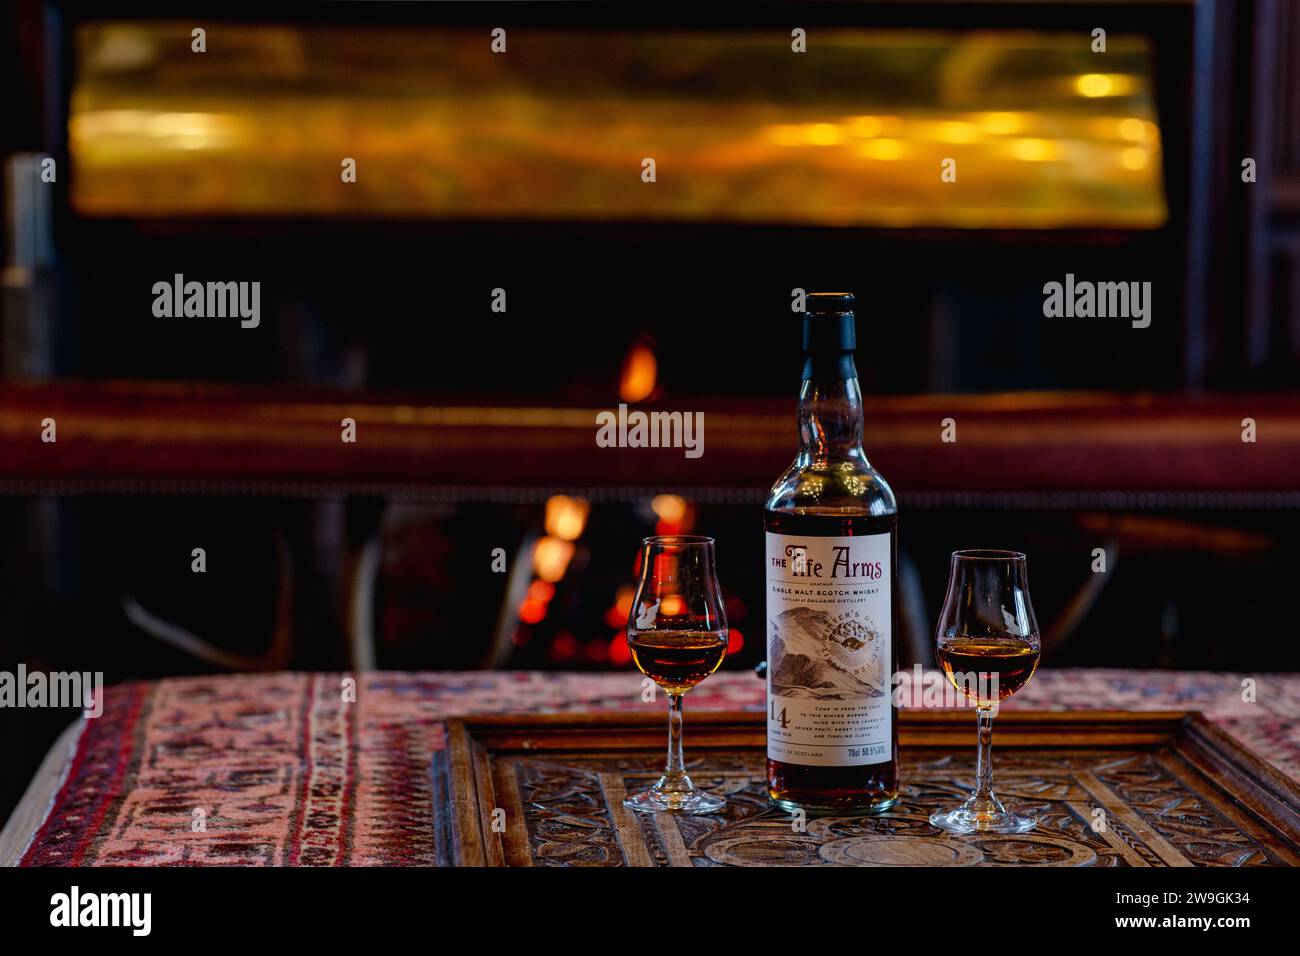 Single malt whisky bottle with two glasses on the table near the burning fireplace. Rest and relaxation concept Stock Photo